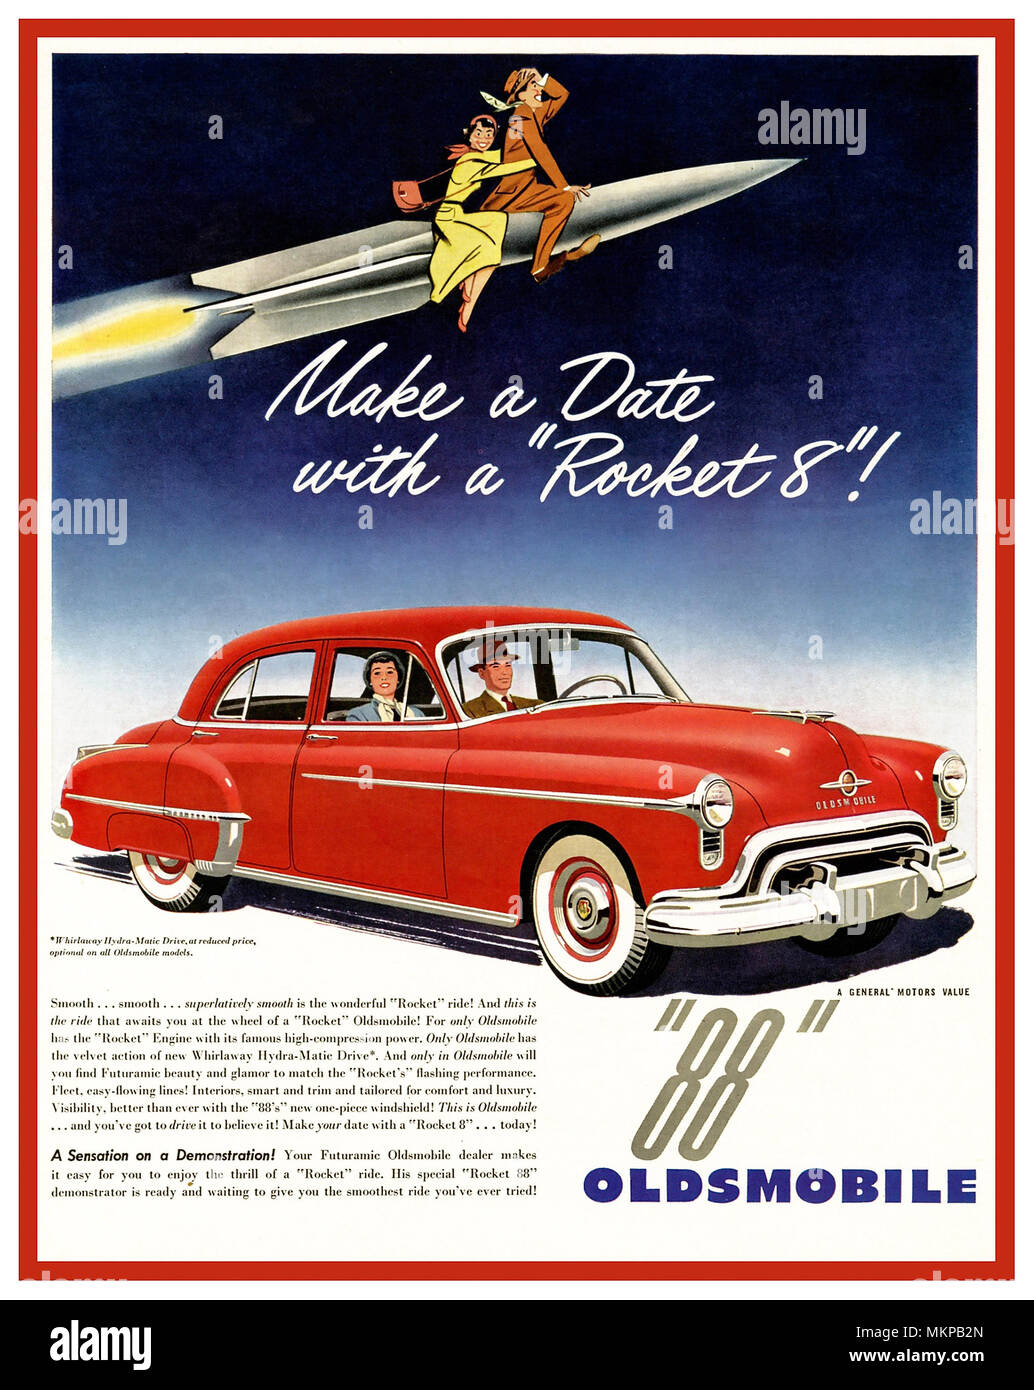 OLDSMOBILE Vintage 1949-1950’s American Car advertisement for The Oldsmobile 88 (known  as the Rocket Eighty Eight)  a full-size car that was sold and produced by Oldsmobile in various forms from 1949 until 1999 'Make a date with a Rocket 8' ! Stock Photo